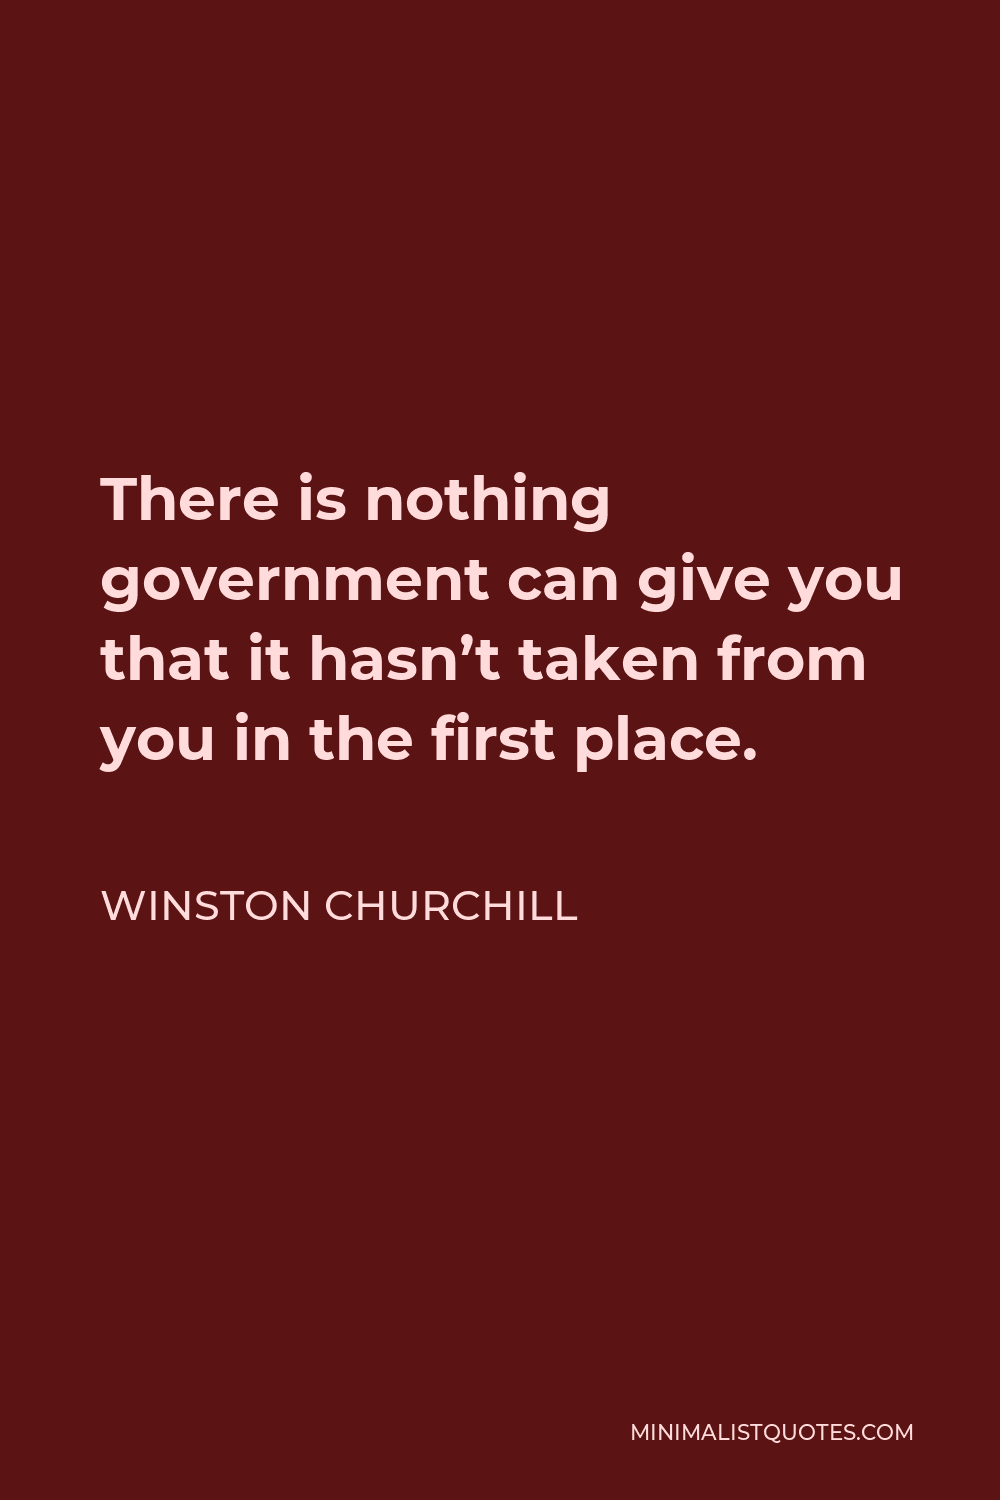 Winston Churchill Quote - There is nothing government can give you that it hasn’t taken from you in the first place.